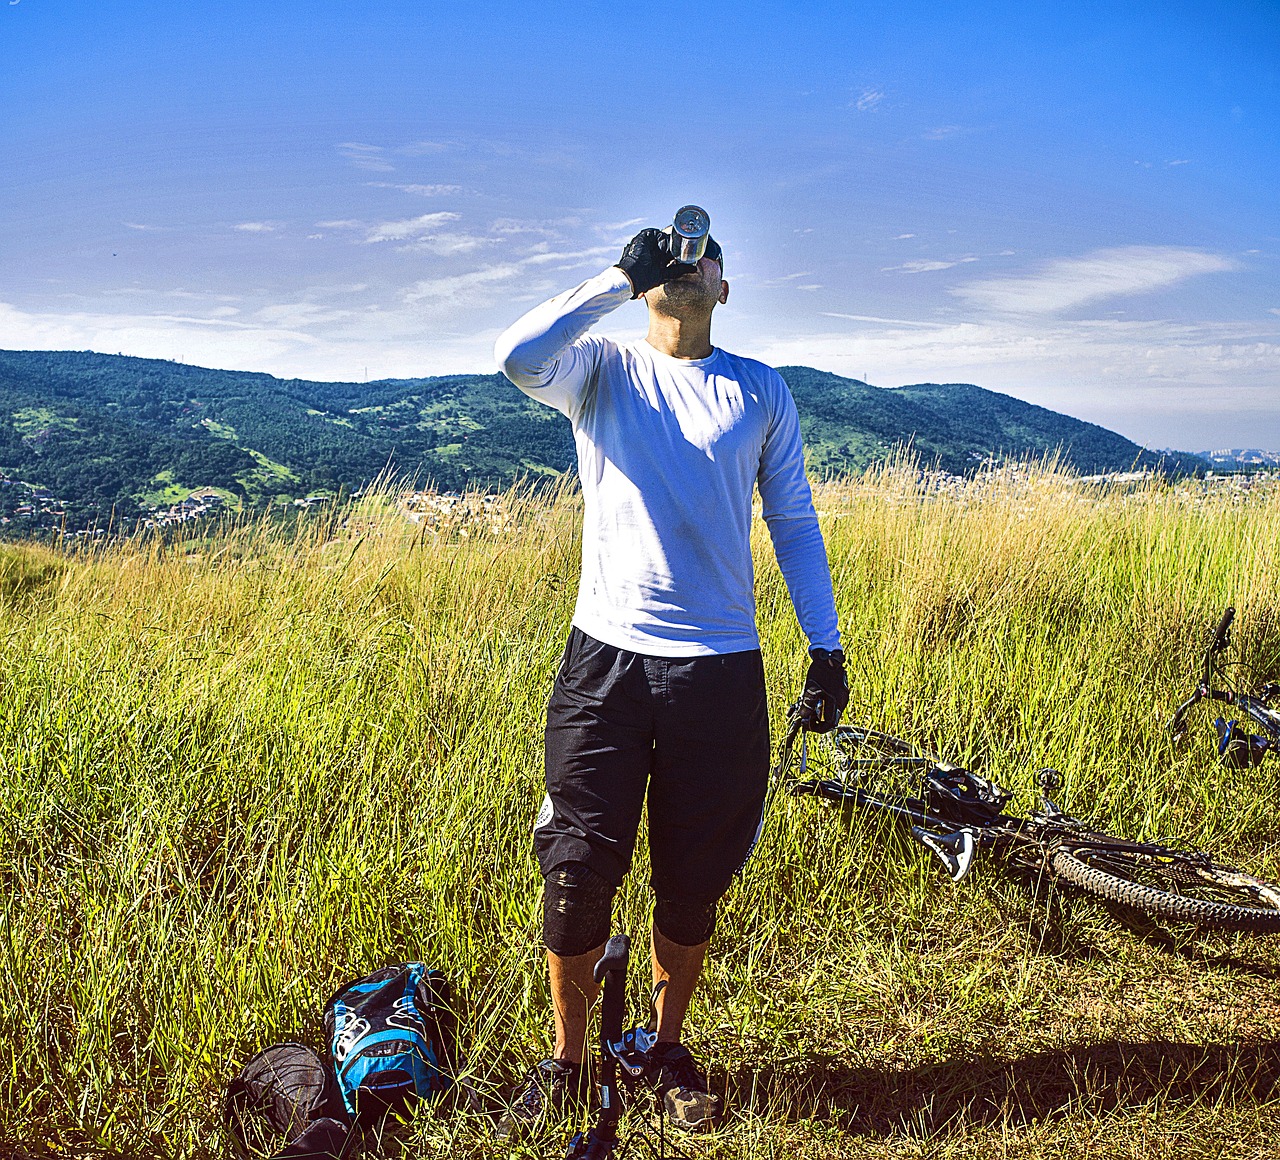 Mountain Bike clothing essentials - shorts, tights, socks, shoes